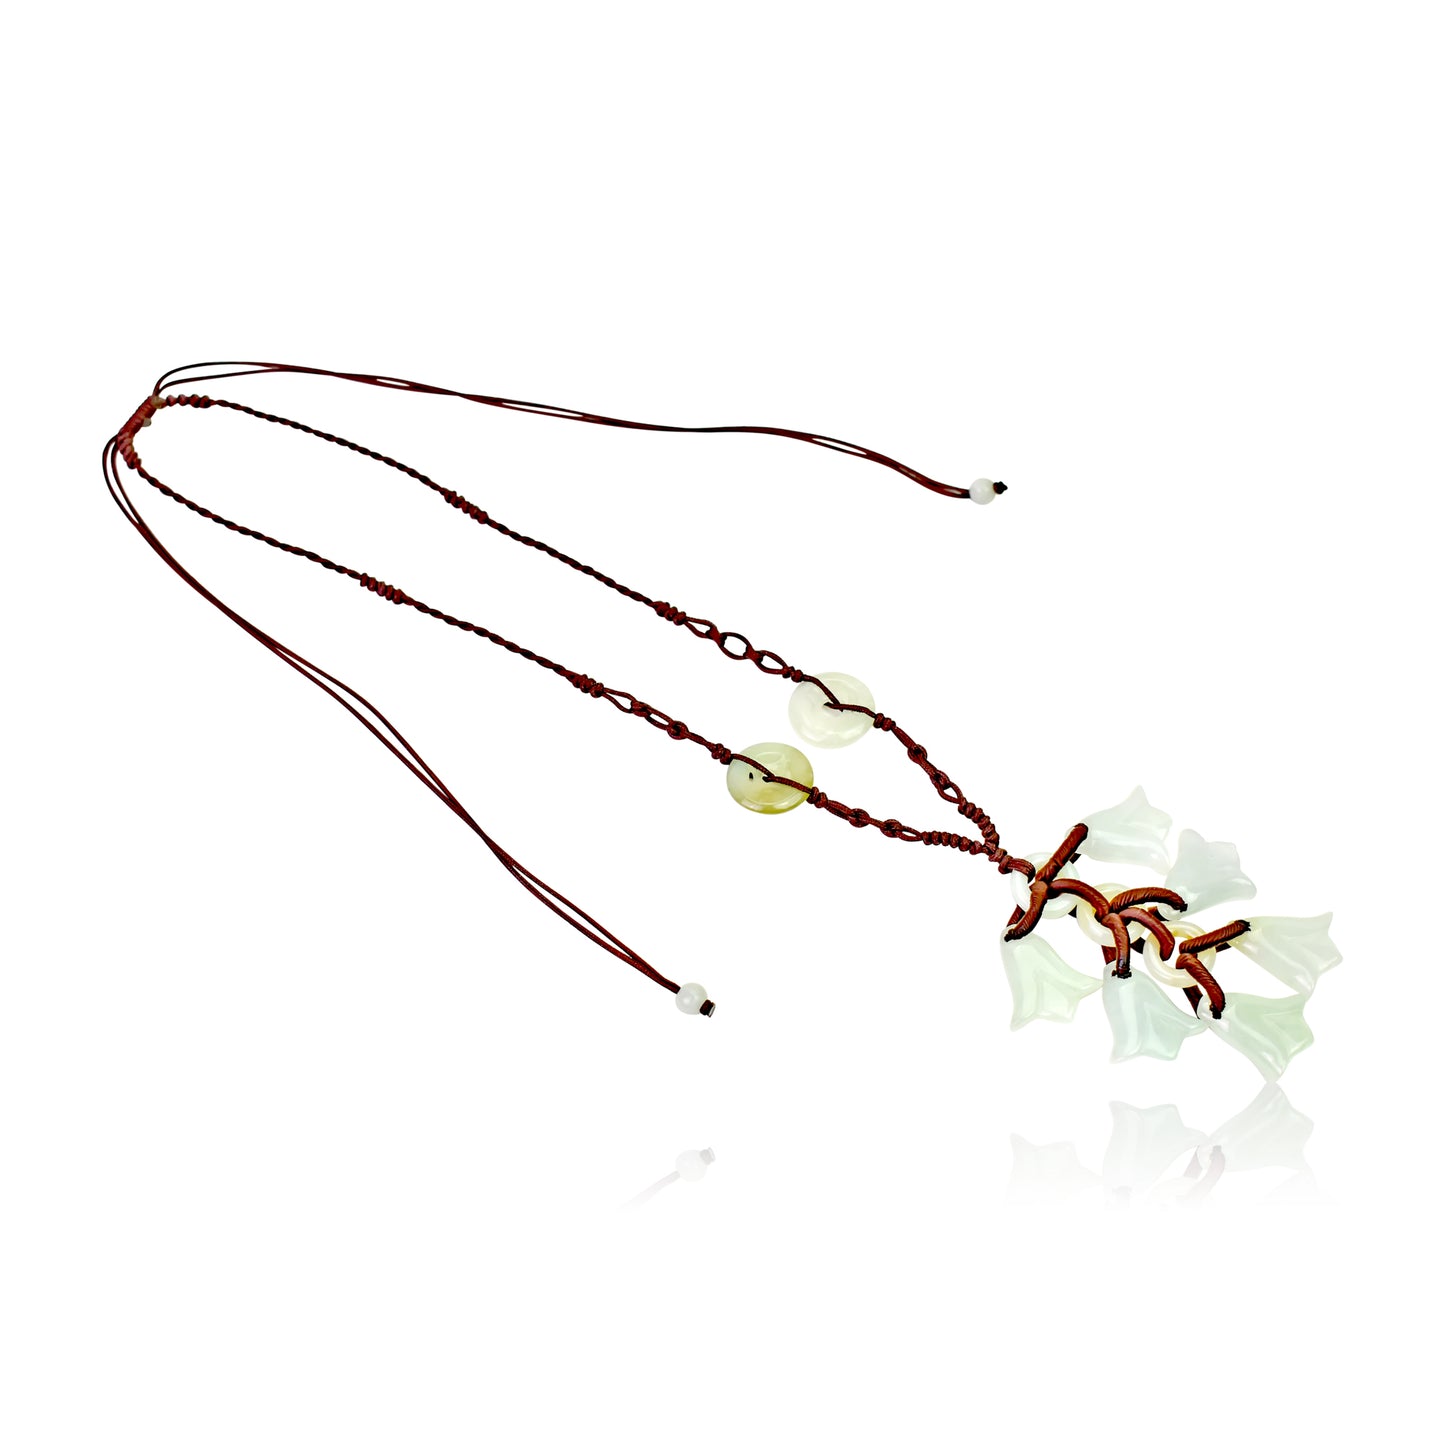 Beautiful and Dainty Bellflower Dangles Handmade Jade Necklace Pendant with Brown Cord